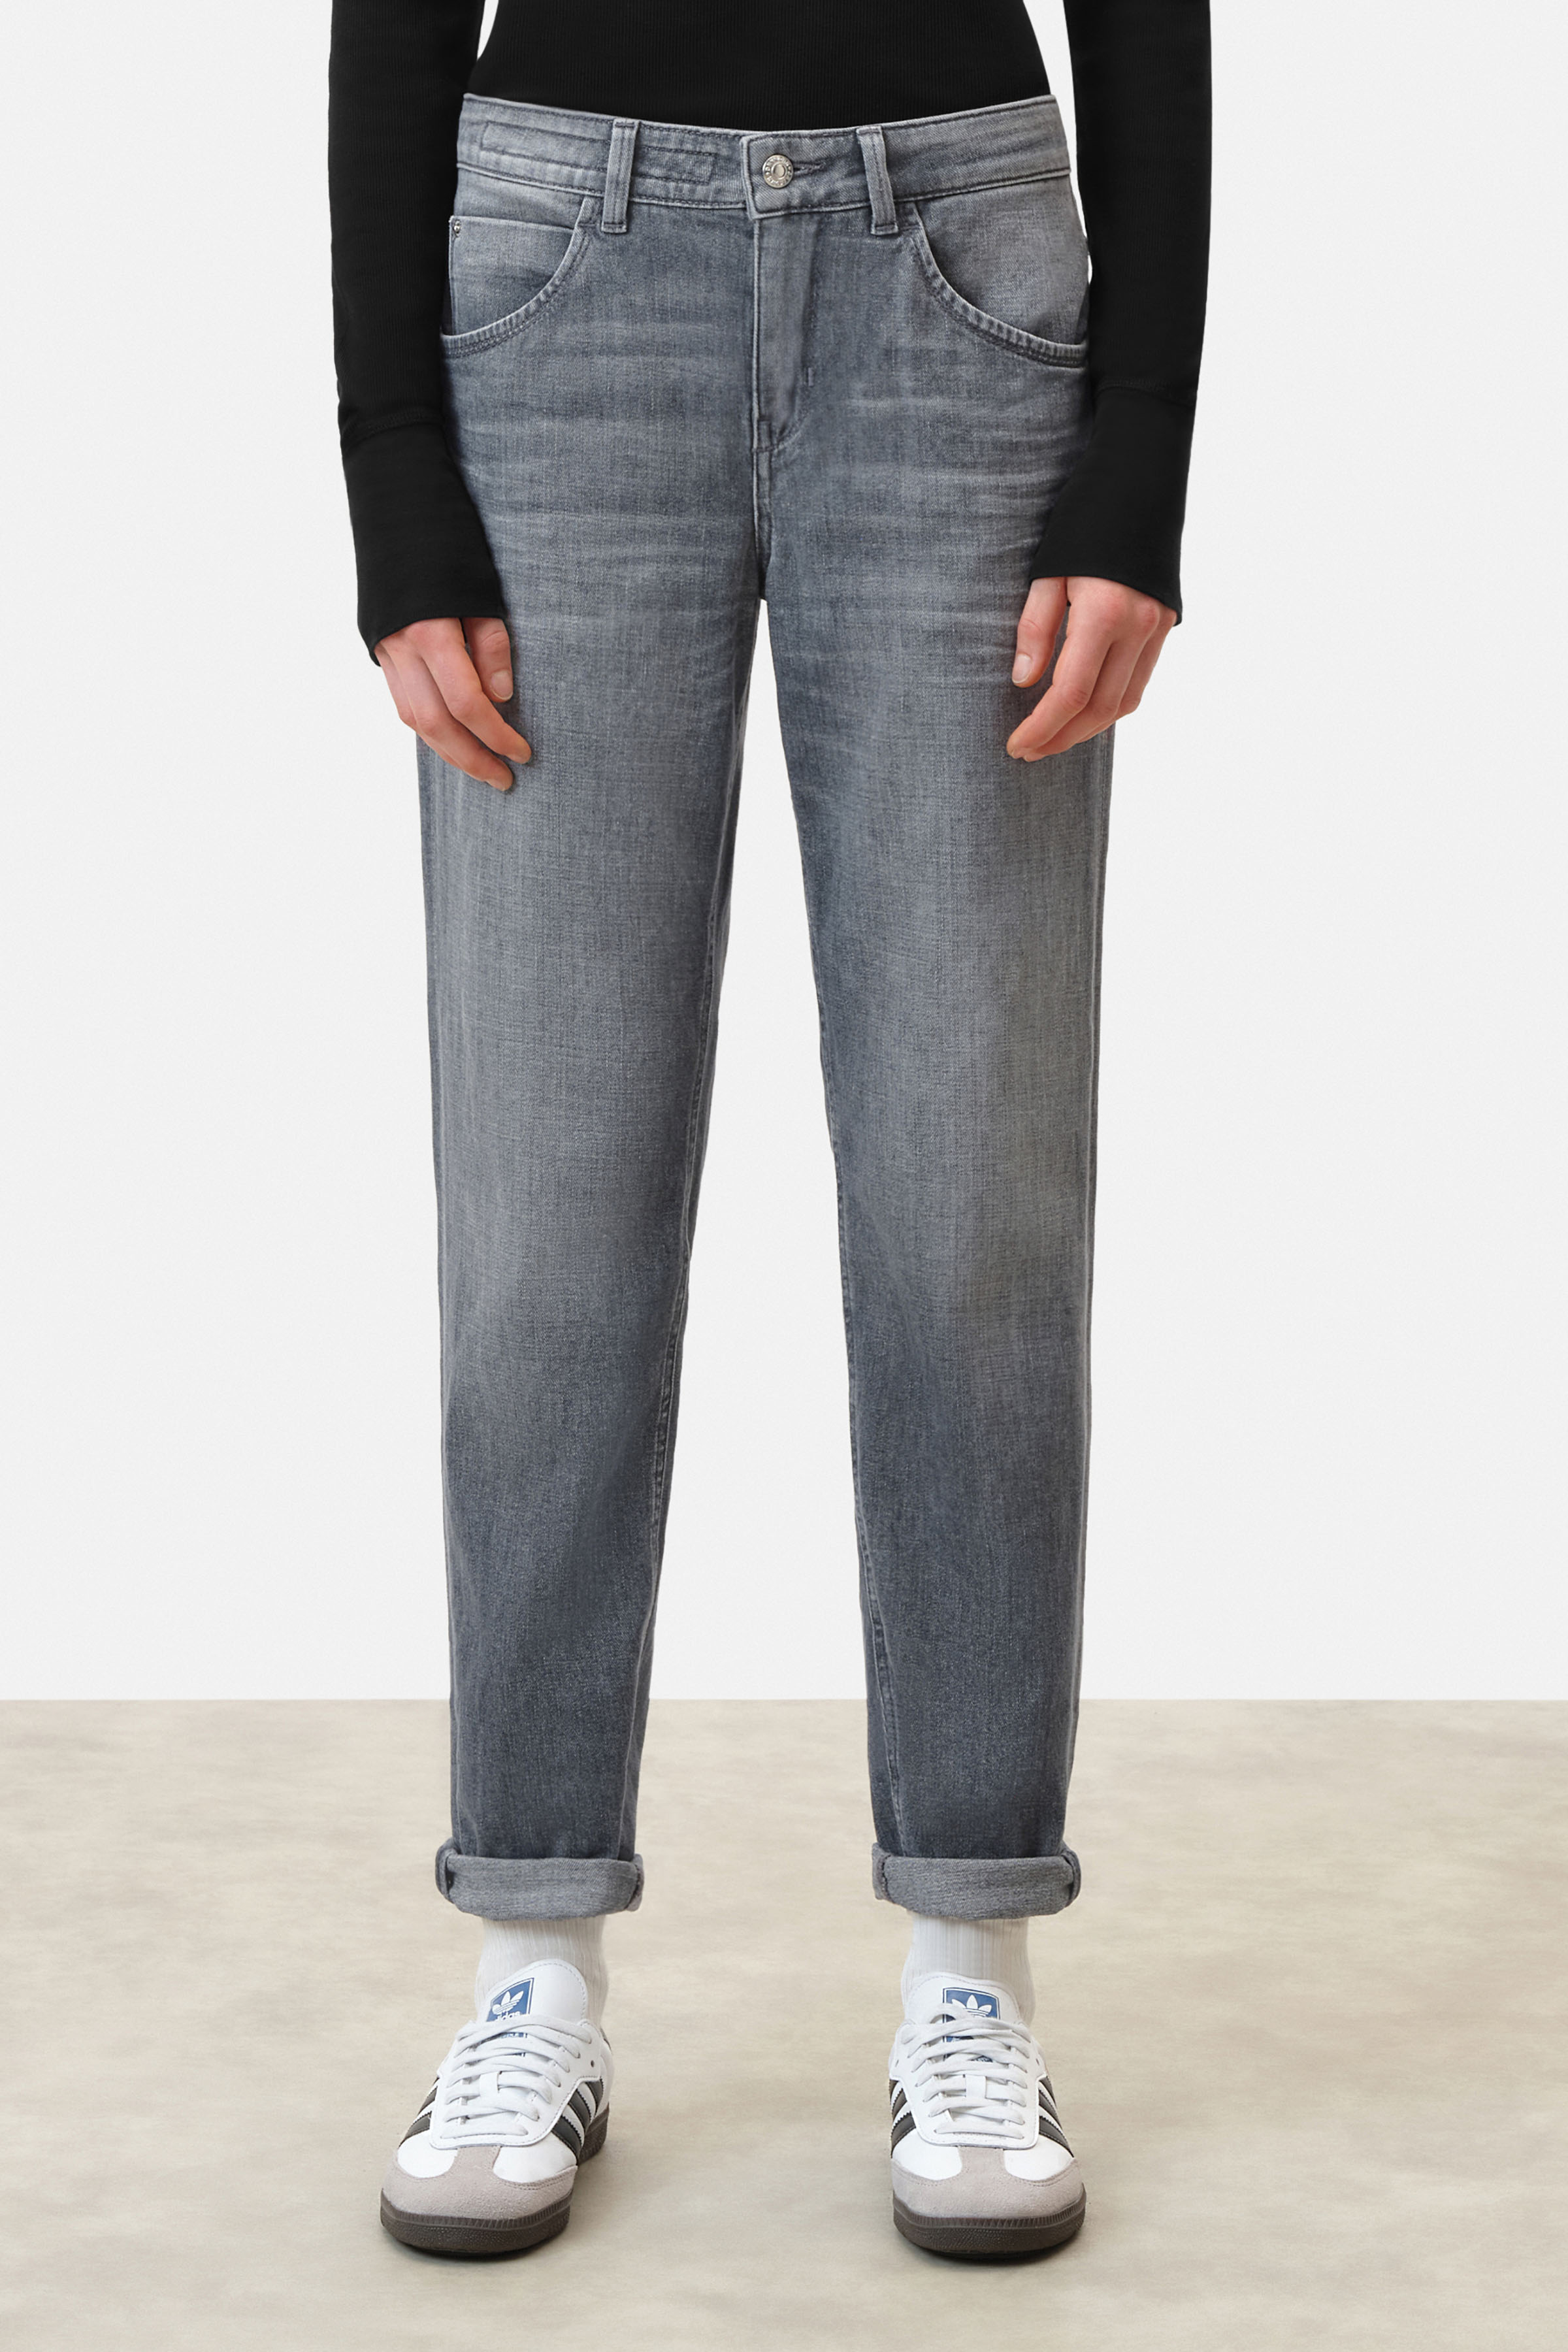 Jeans online at DRYKORN